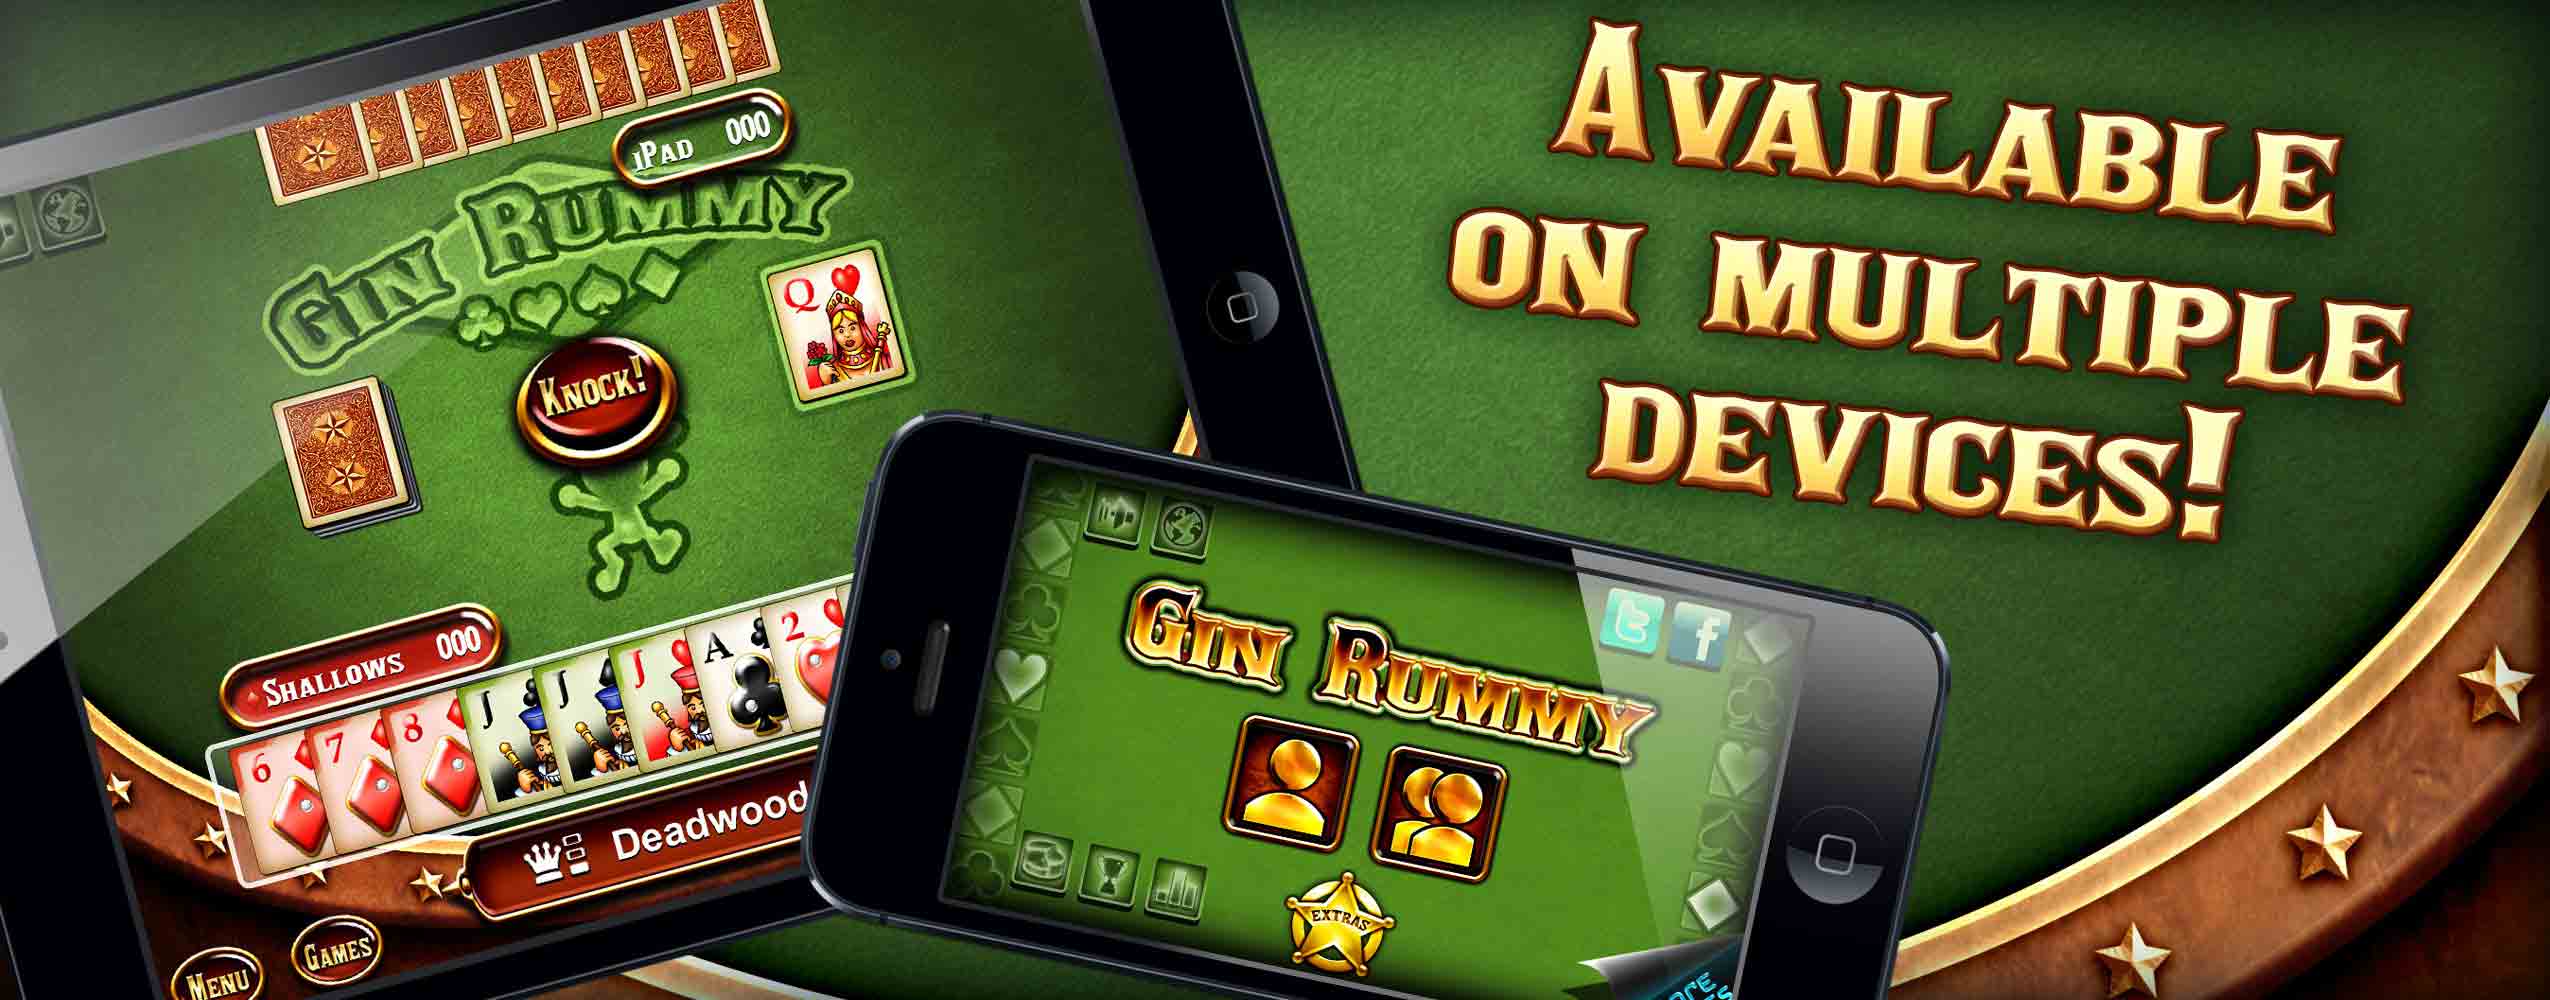 Gin Rummy is available on multiple devices!